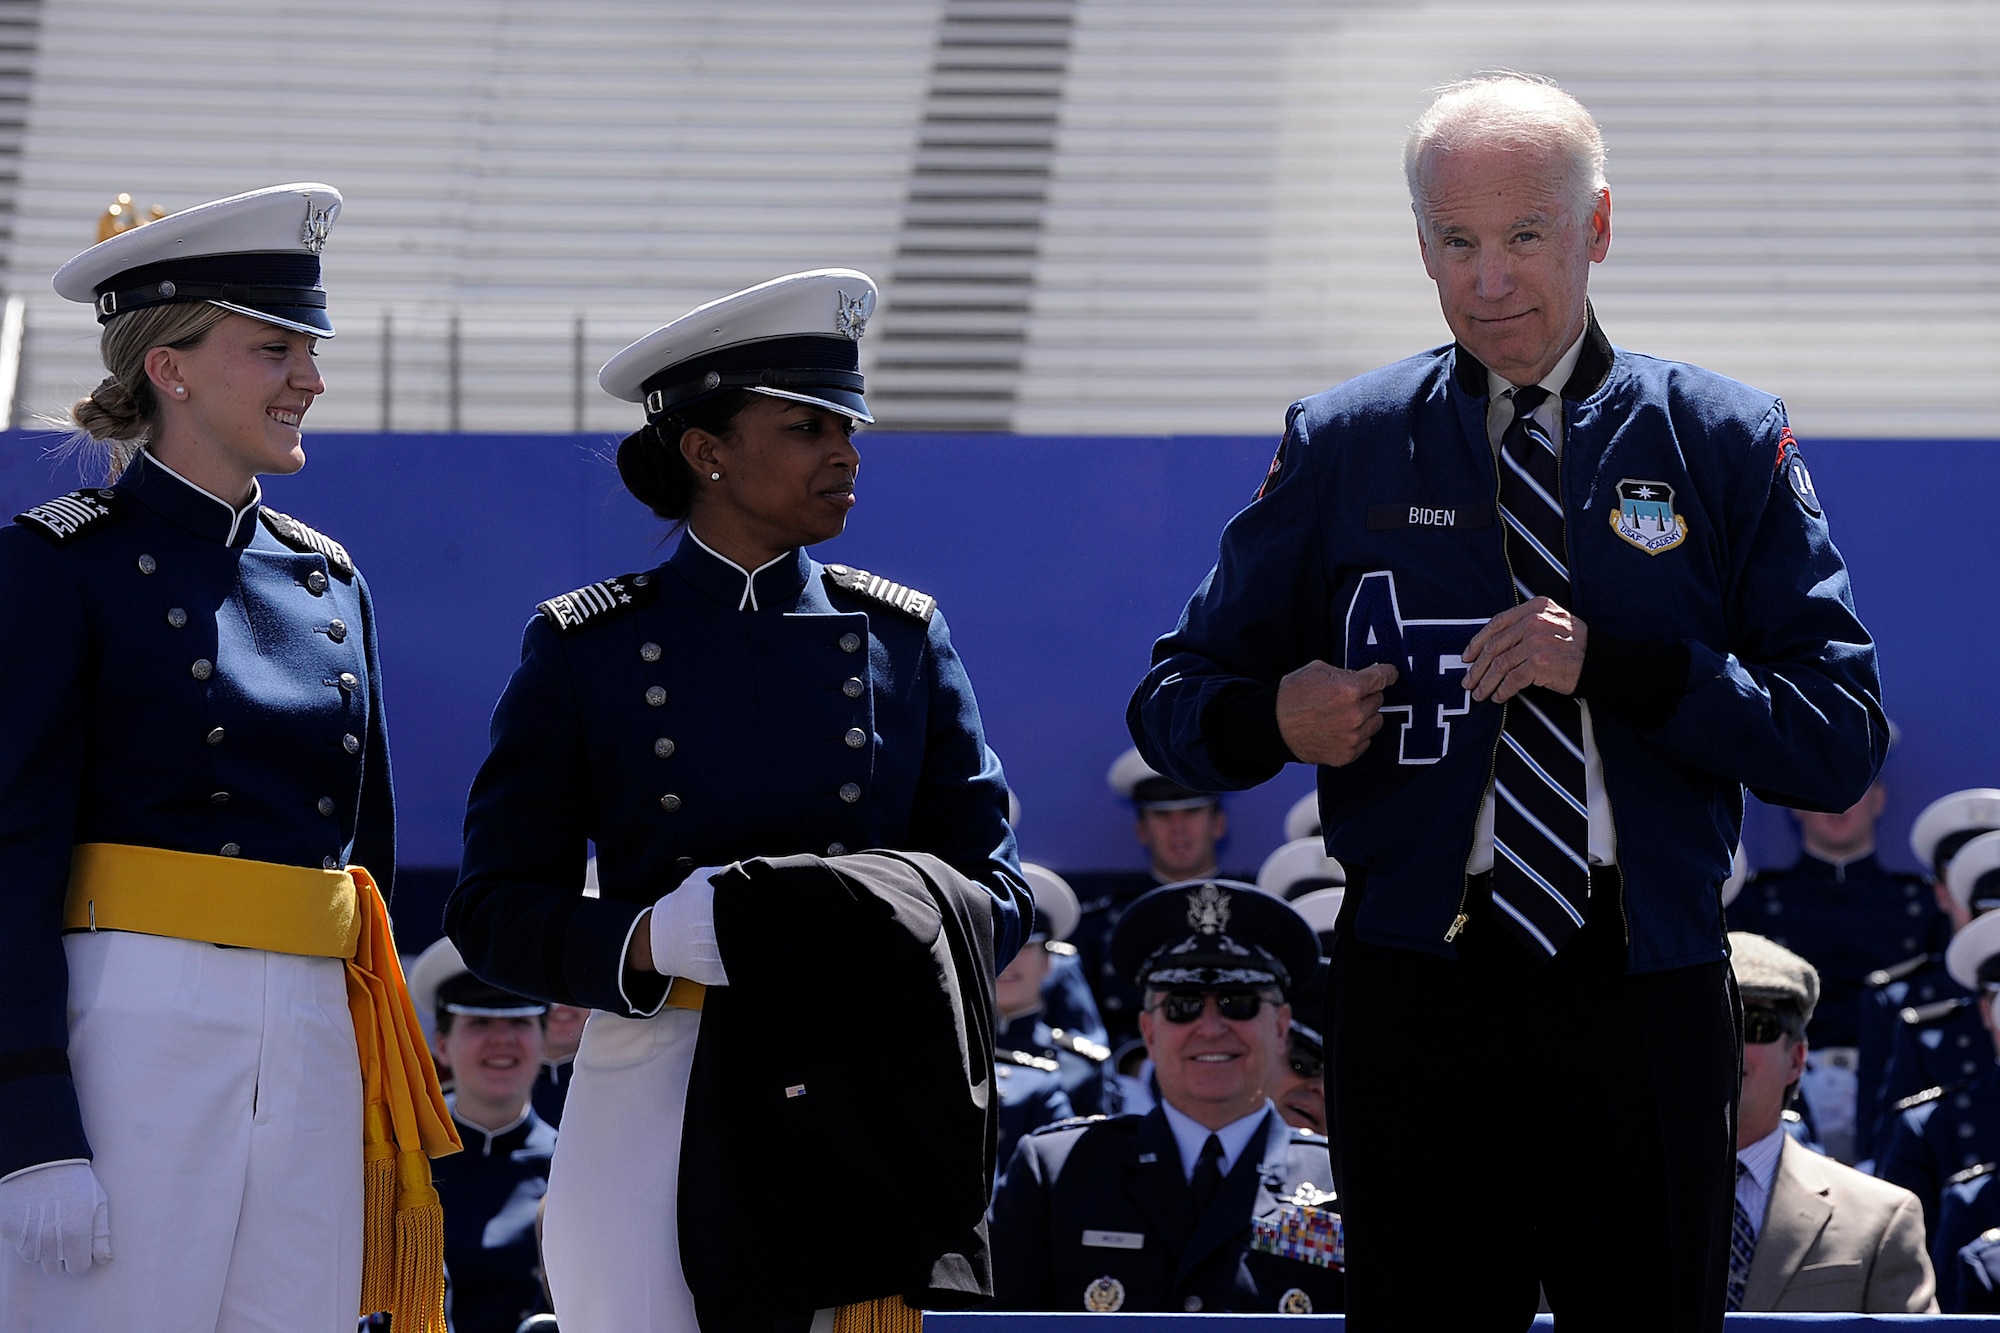 Vice President Joseph R. Biden receives an athletic jacket from the Air Force Academy's Class of 2014 during the Academy's graduation ceremony May 28, 2014, in Colorado Springs, Colo. Biden also delivered the commencement for the Academy's Class of 2009. (U.S. Air Force photo/Sarah Chambers)